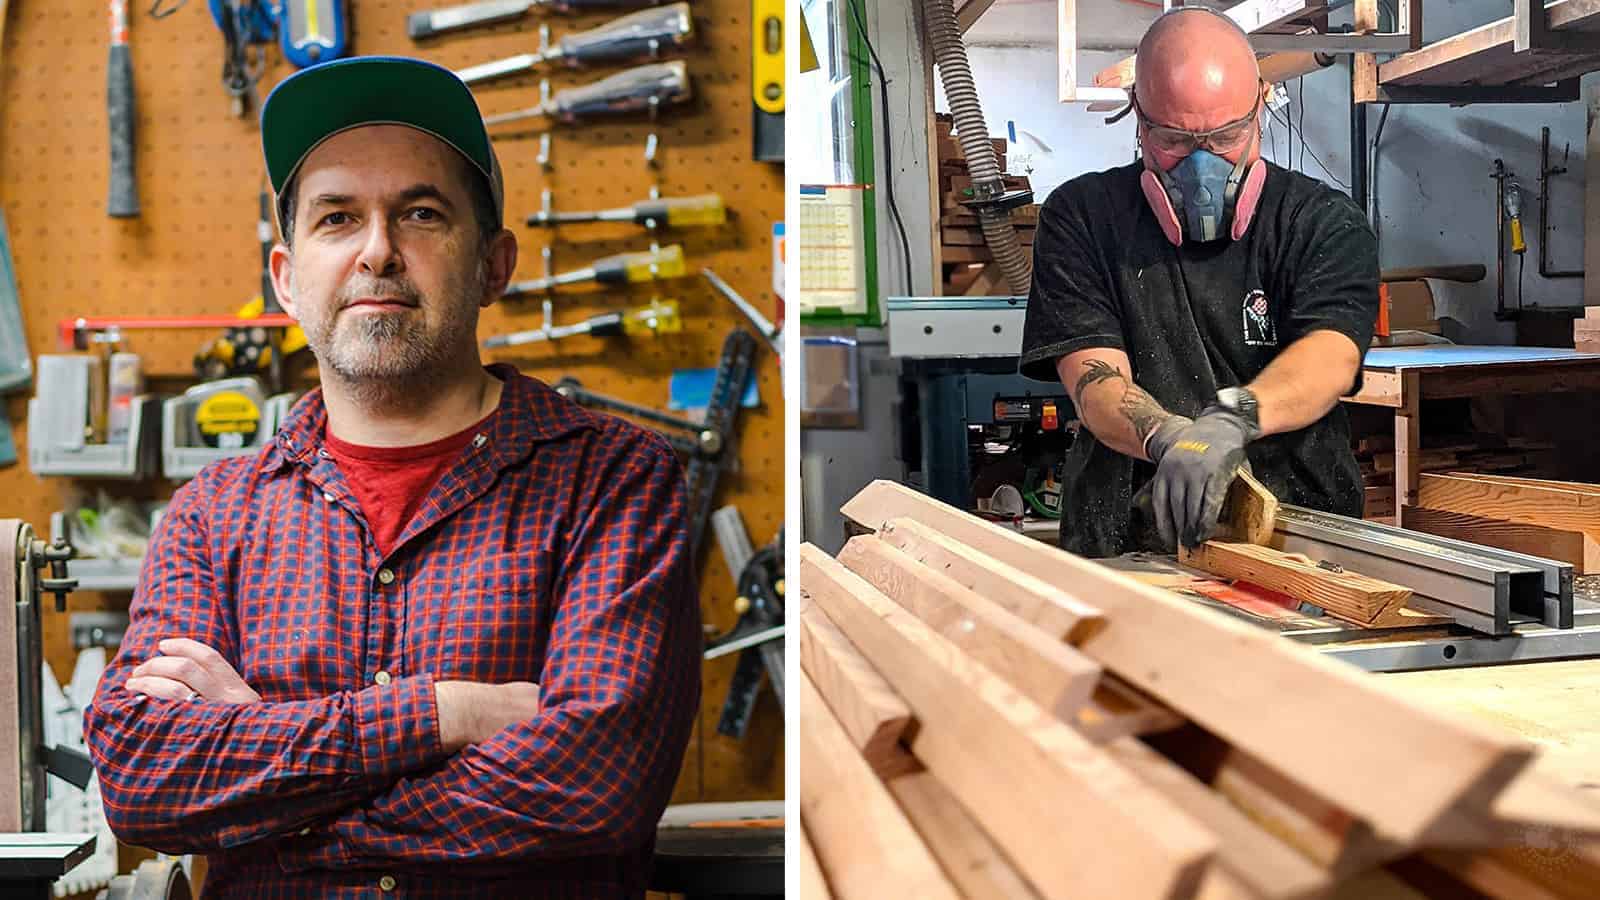 California Employer Teaches Former Inmates the Craft of Furniture Making